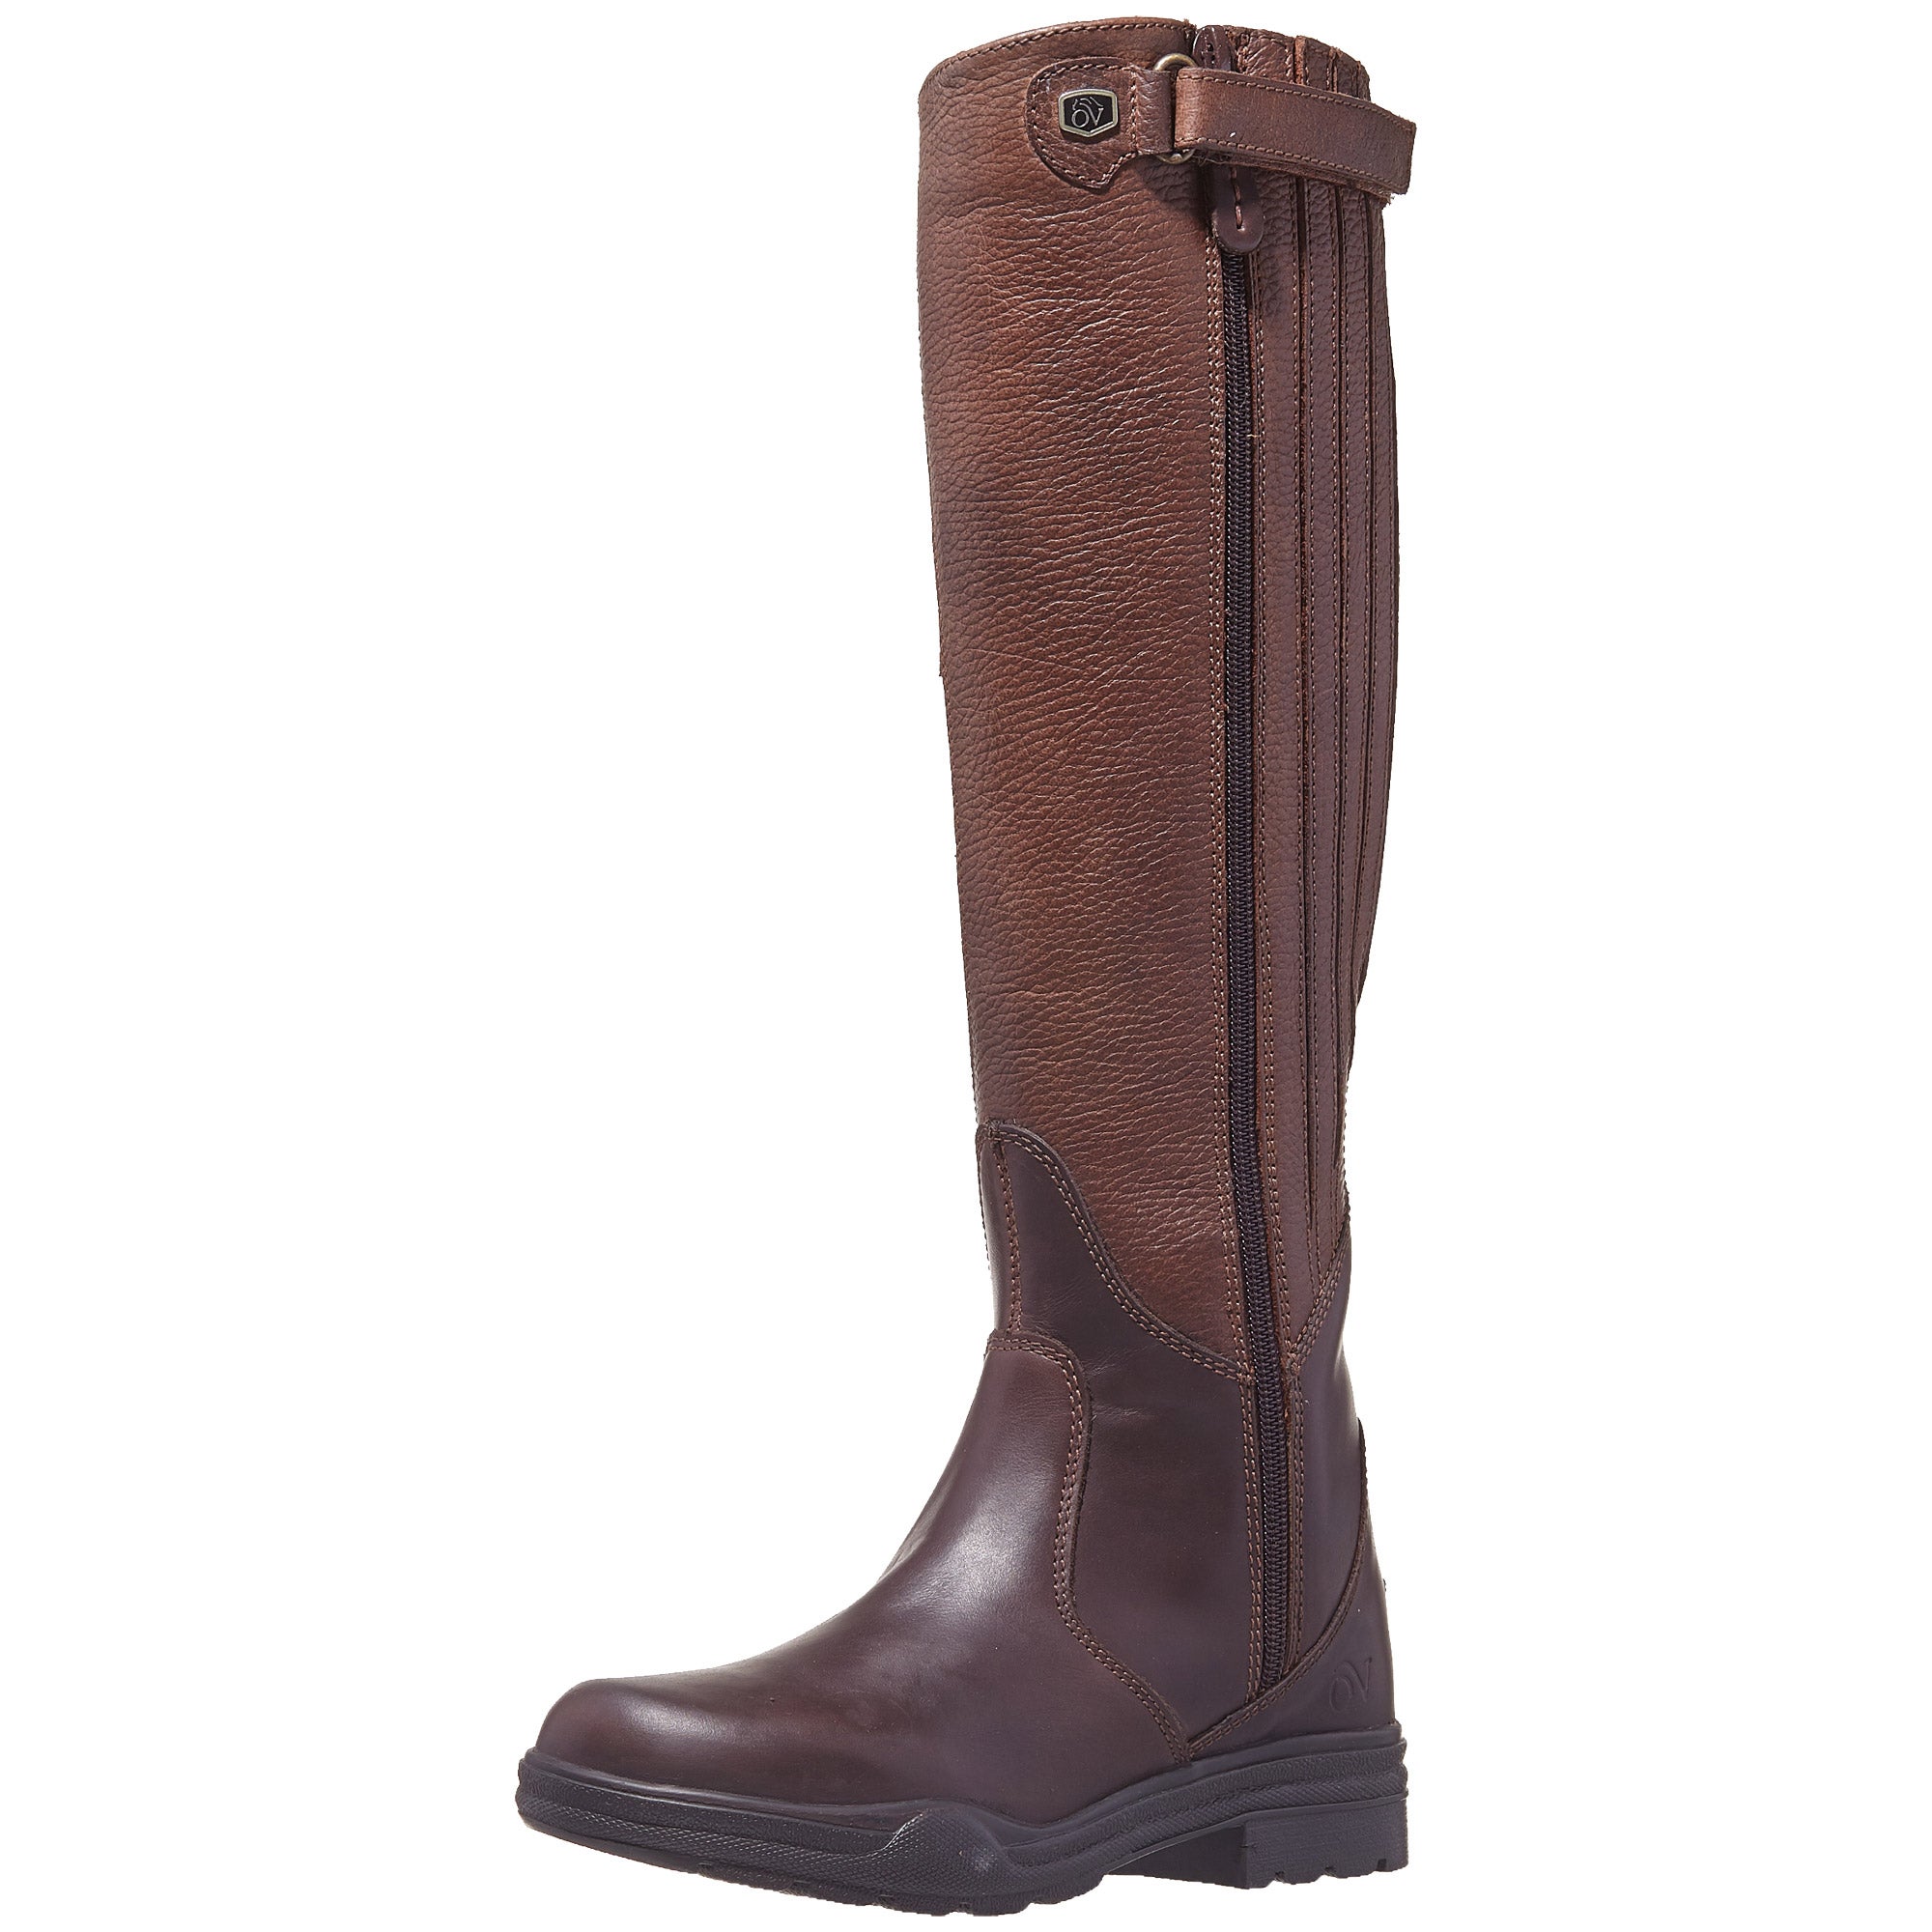 Ovation Women's Moorland Rider Tall Riding Boots with Dry-Tex Lining/Side Zip 